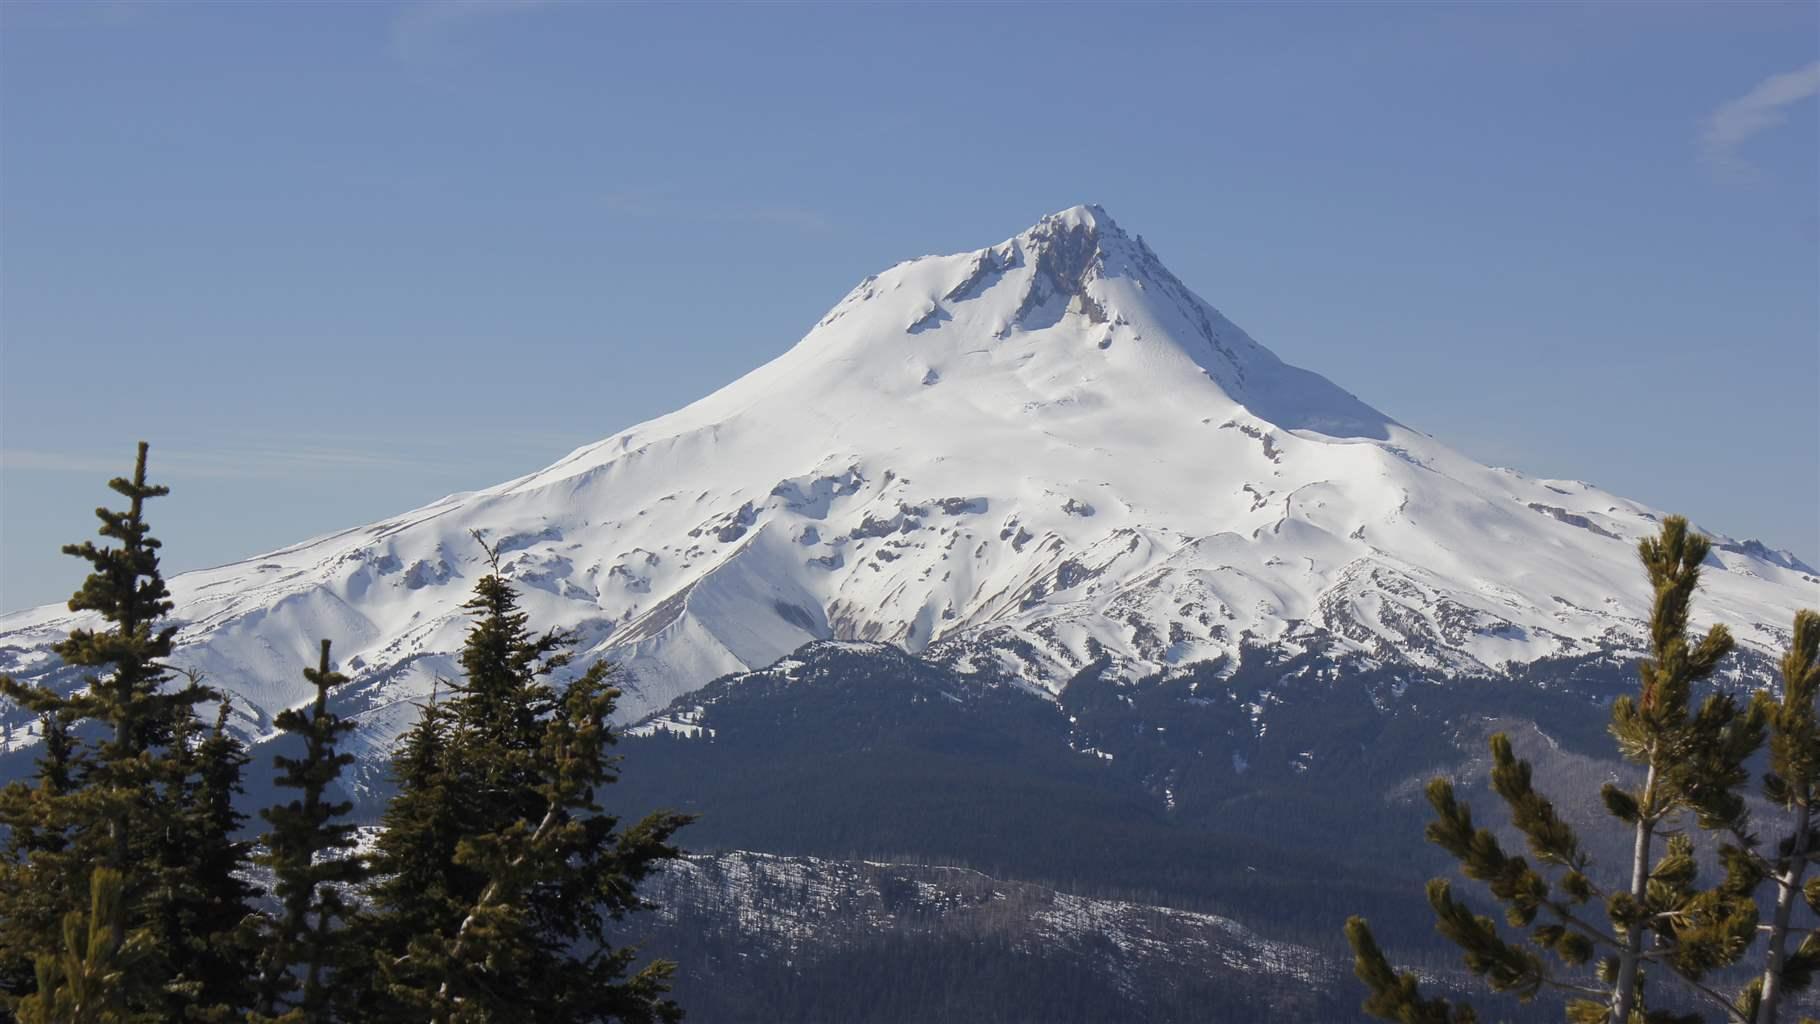 A snowy Mount Hood on a late winter day as seen from Lookout Mountain in the Badger Creek Wilderness in the Mt. Hood National Forest in Oregon.